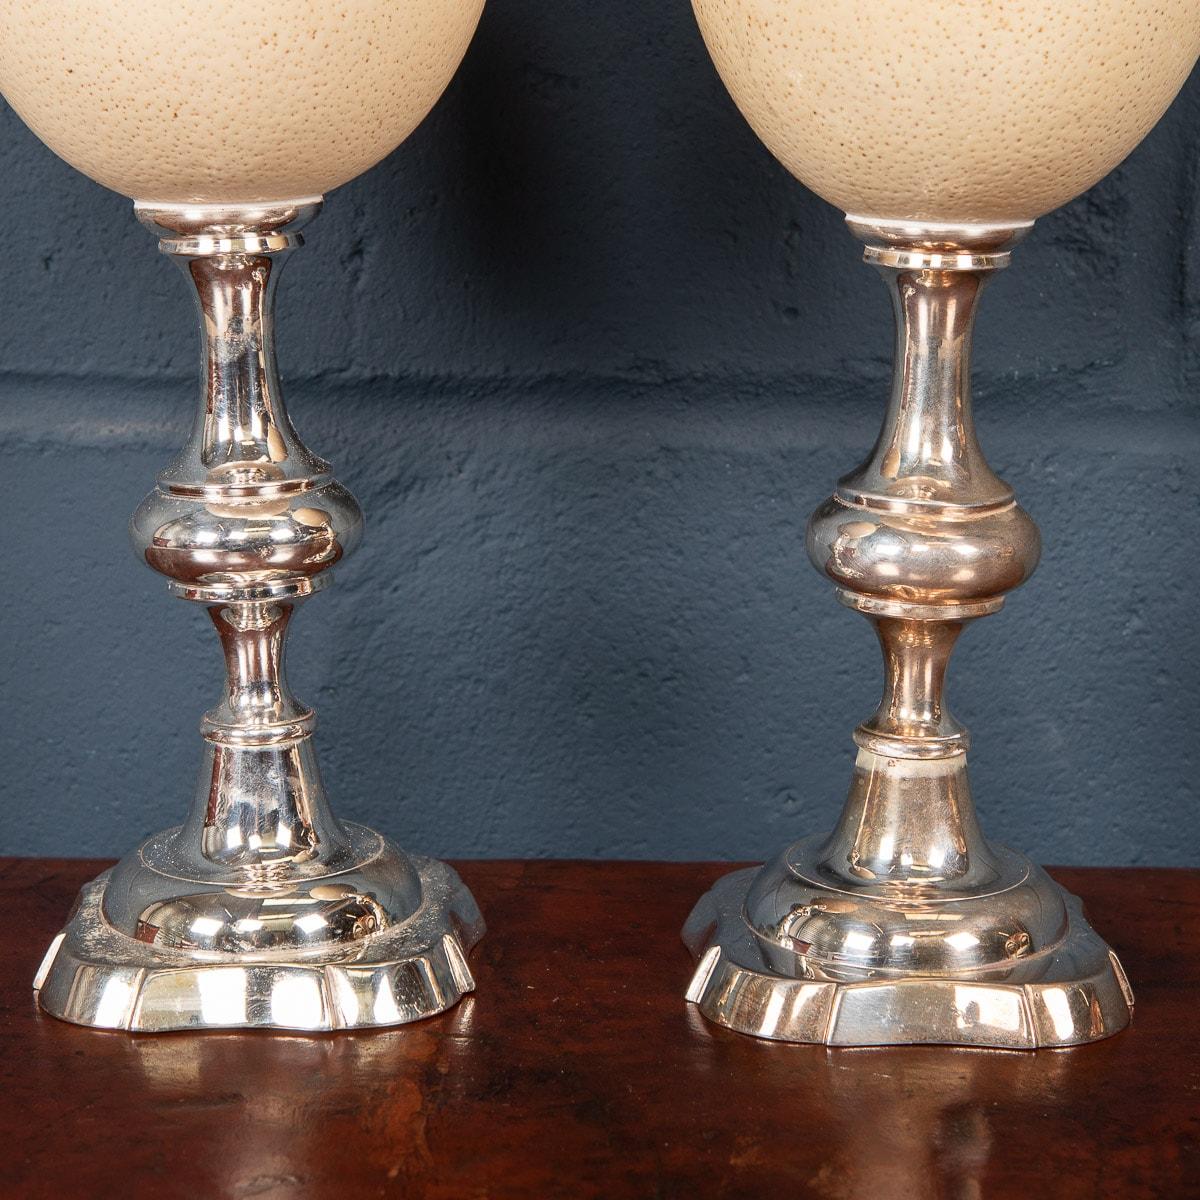 20th Century Pair of Silver Plated Candlesticks with Ostrich Egg Body, England 2